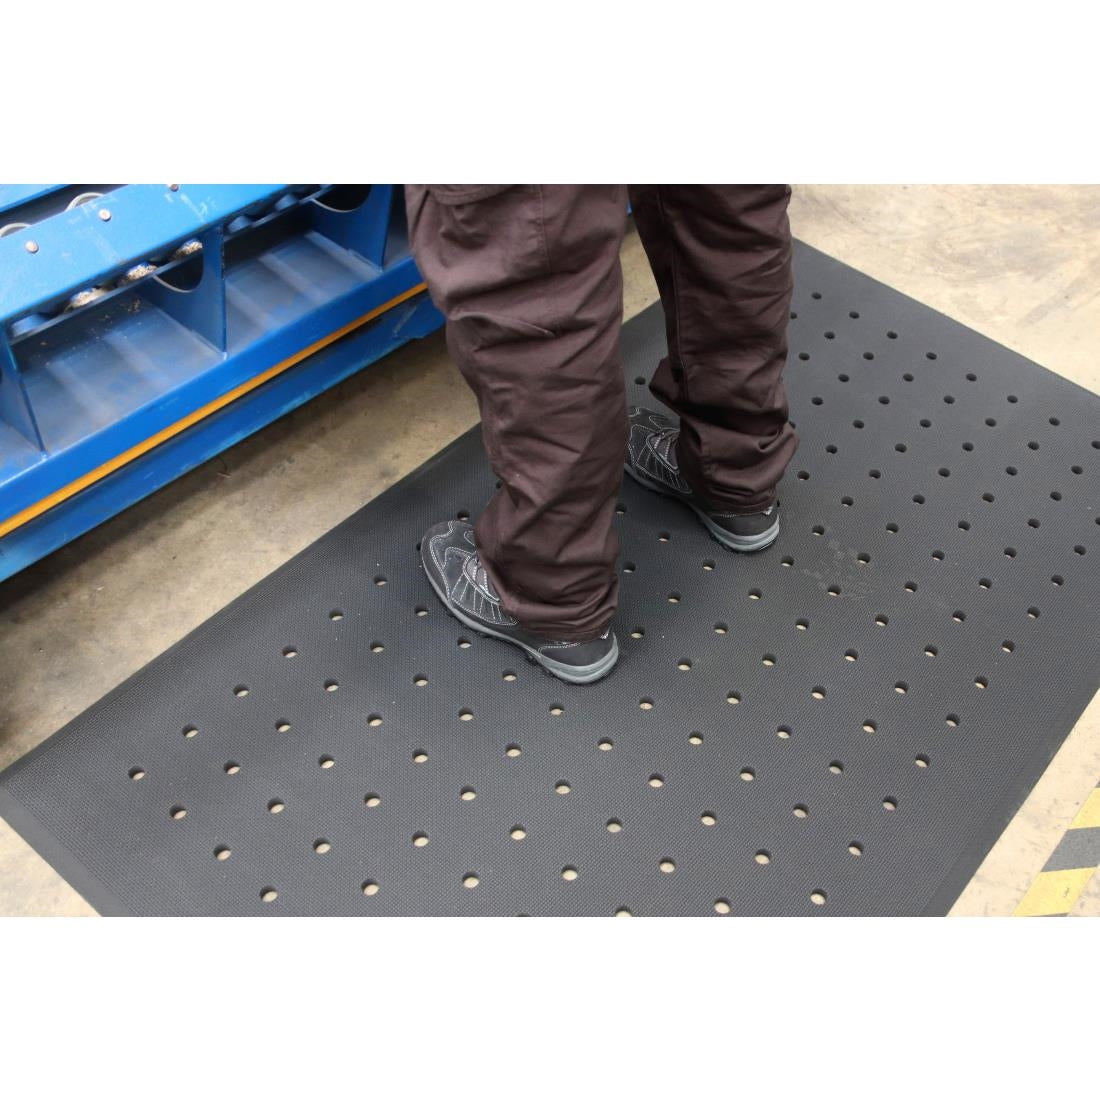 FT341 COBA Hygimat Anti-Fatigue Mat Black With Drainage Holes 0.6 x 0.9m JD Catering Equipment Solutions Ltd